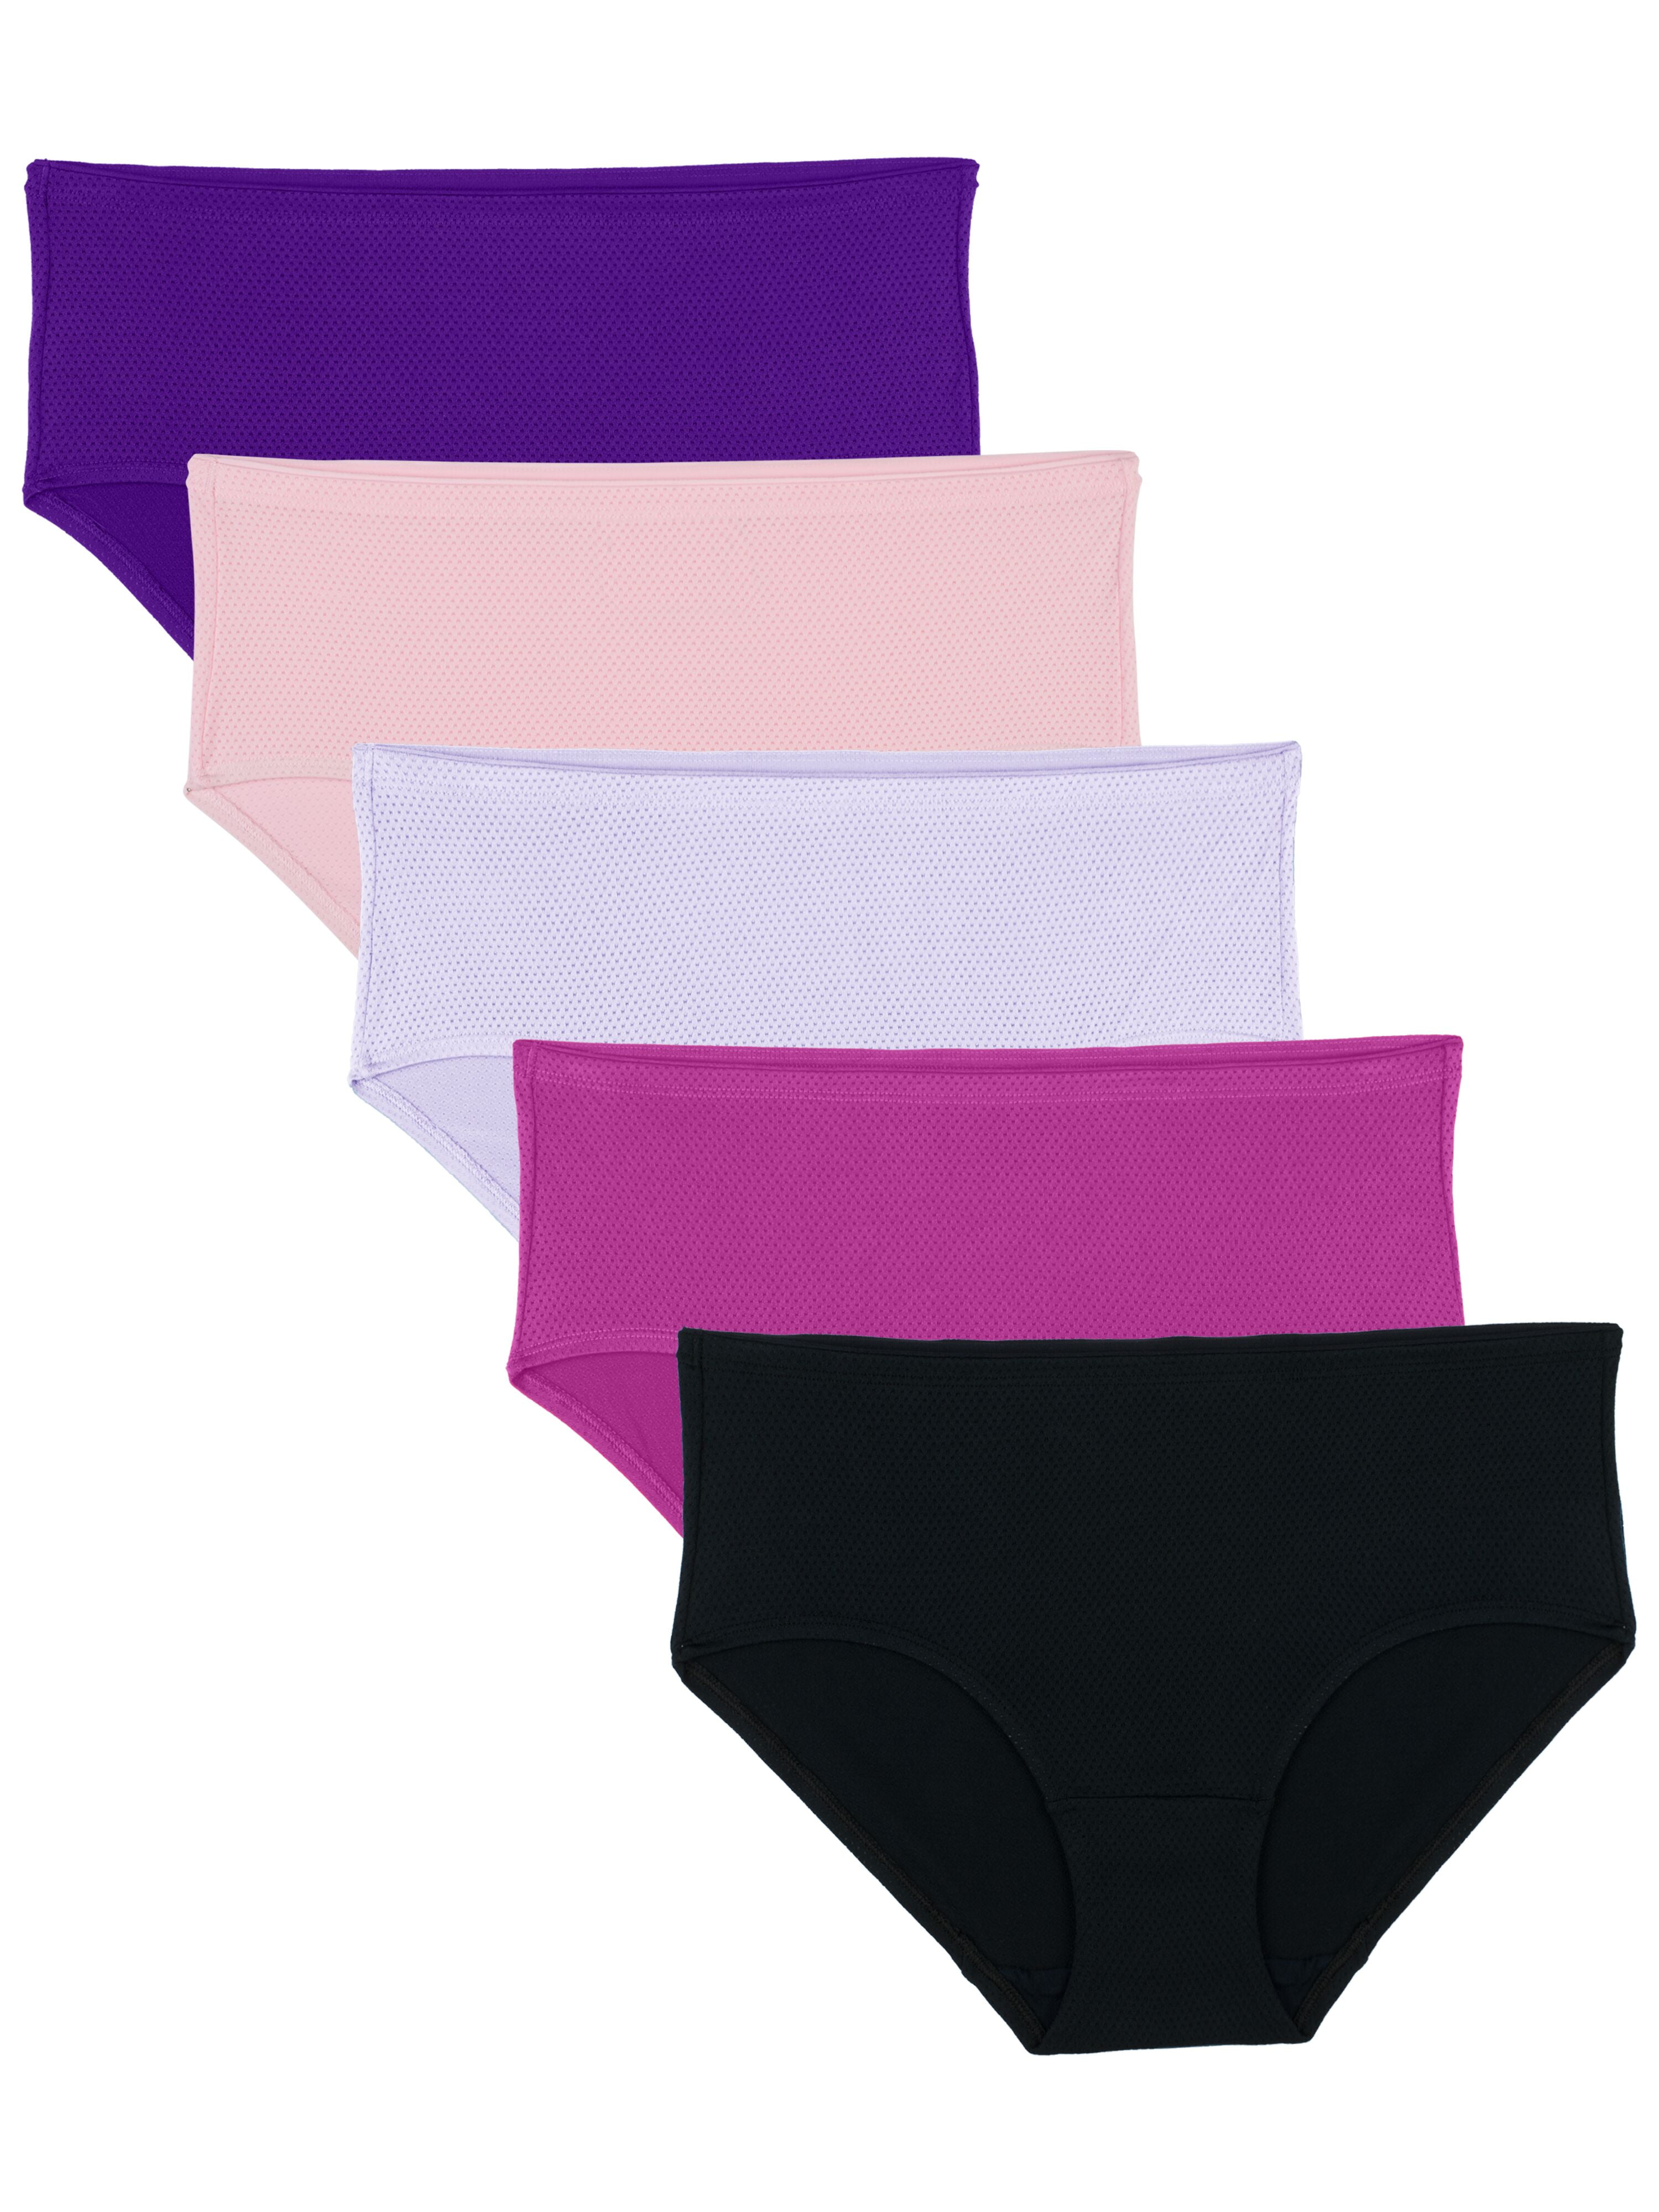 Fruit of the Loom Women's Premium Breathable Micro-Mesh Low Rise Brief  Panty, 5 Pack, Sizes 5-9